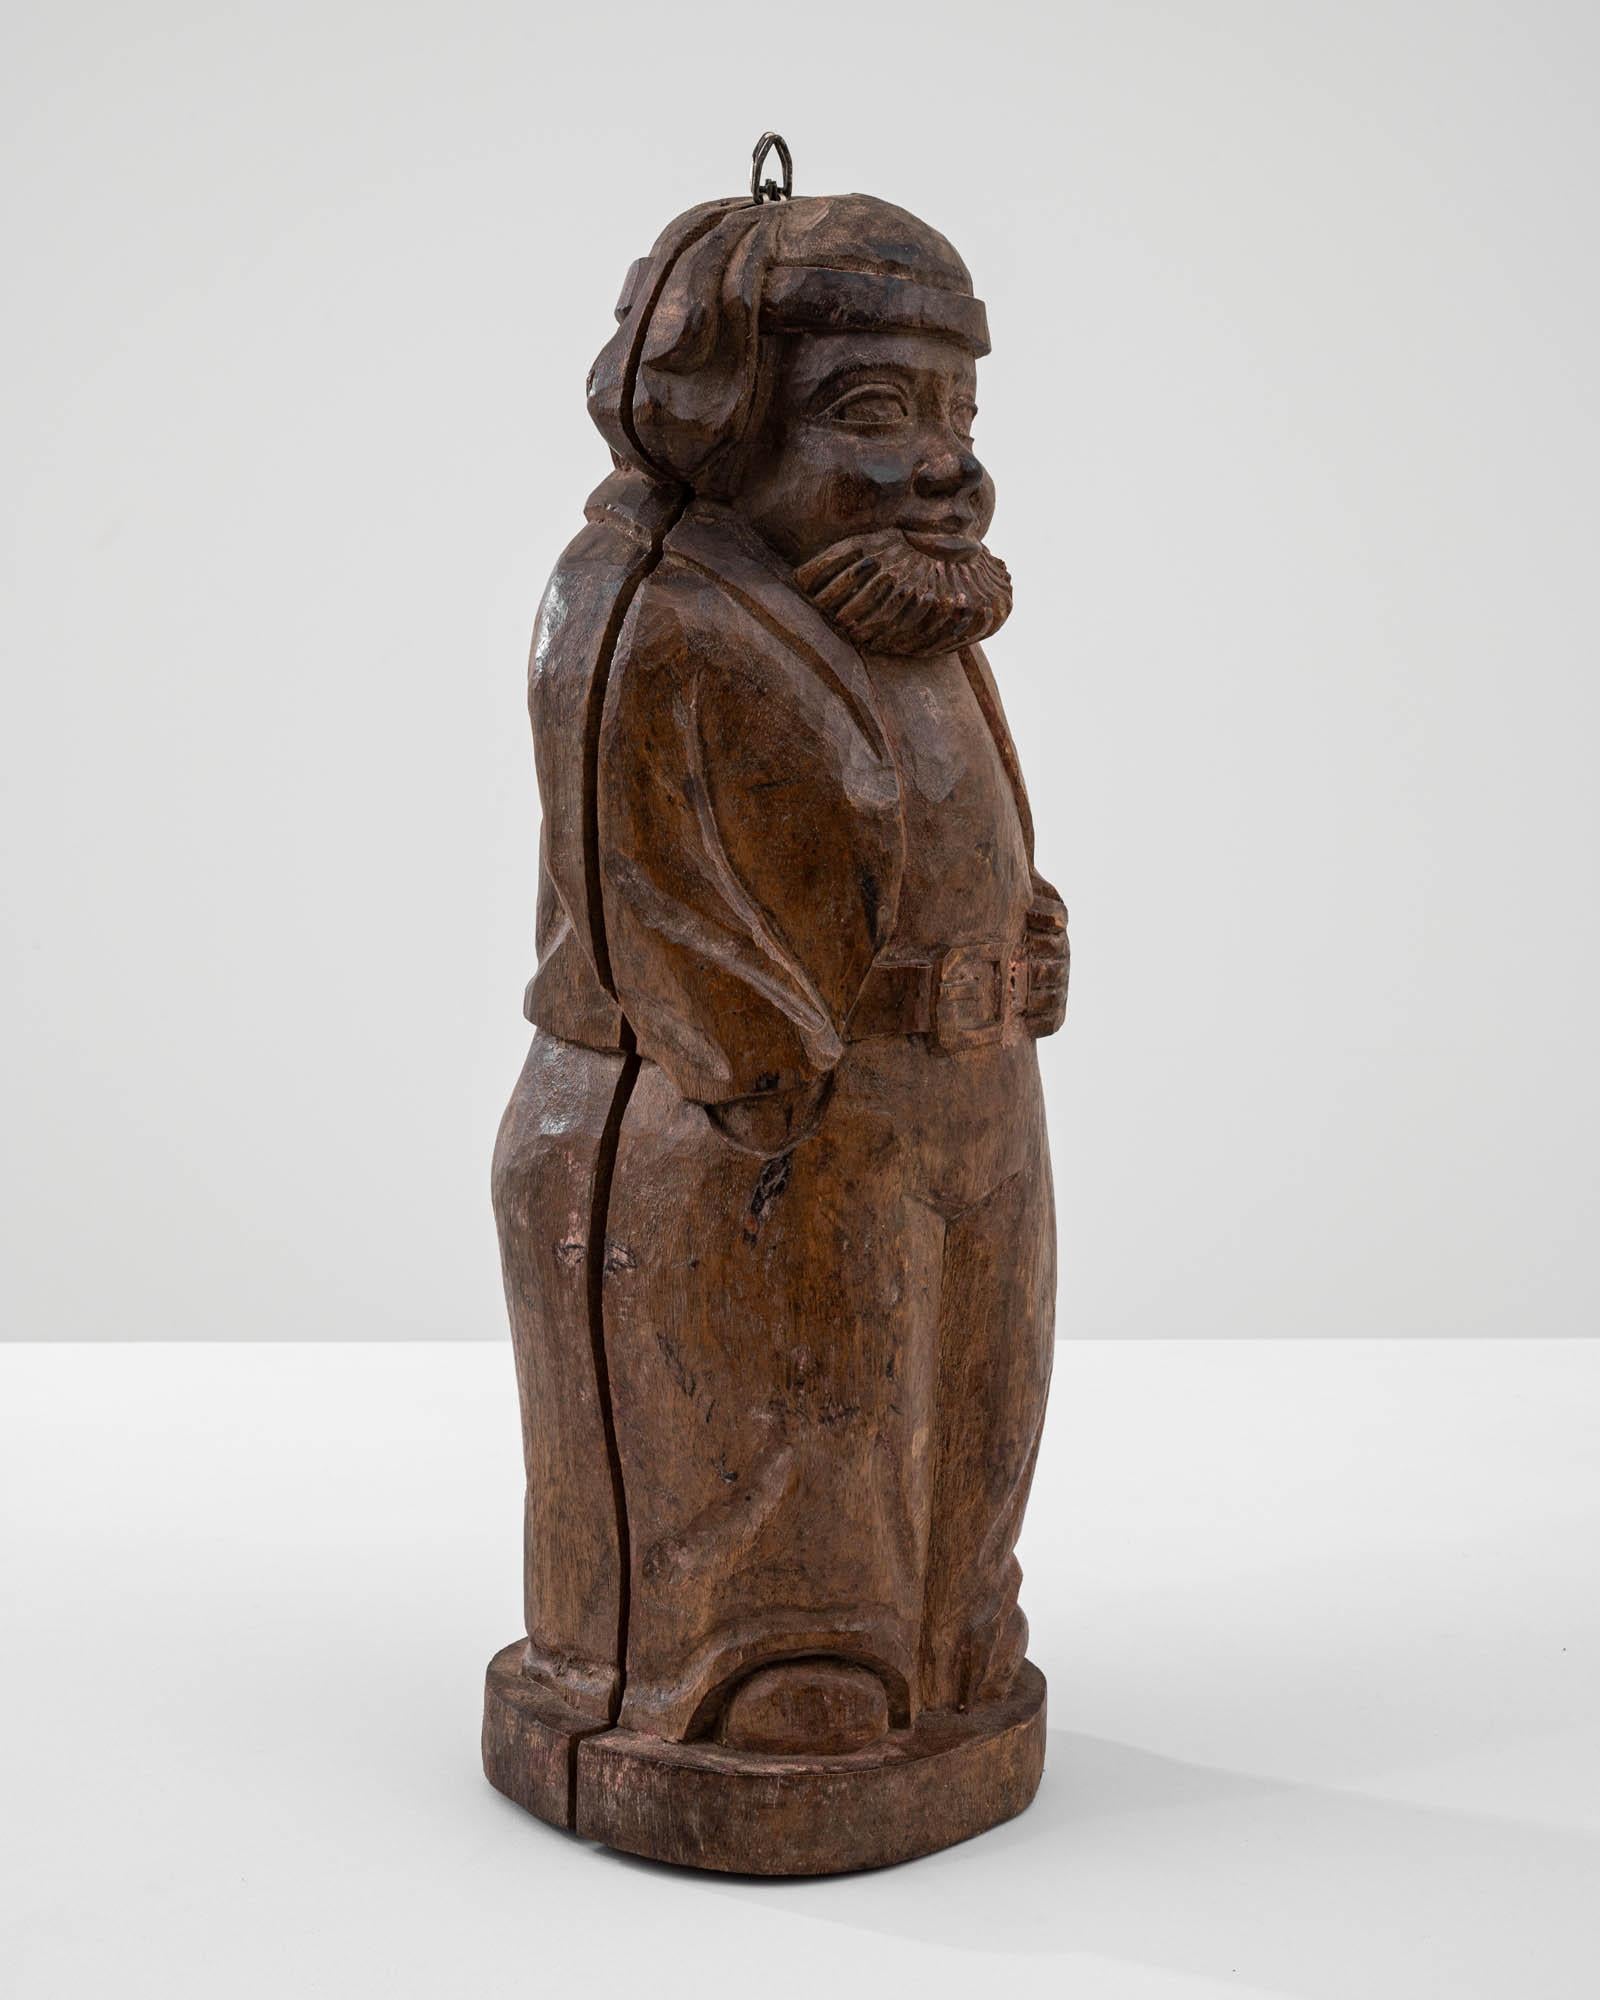 Embrace the whimsical charm of this 20th Century French Carved Wooden Man Decoration, a delightful portrayal of a bearded figure dressed in cozy pajamas venturing out into the cold. The unique design allows the figure to open in half, revealing a